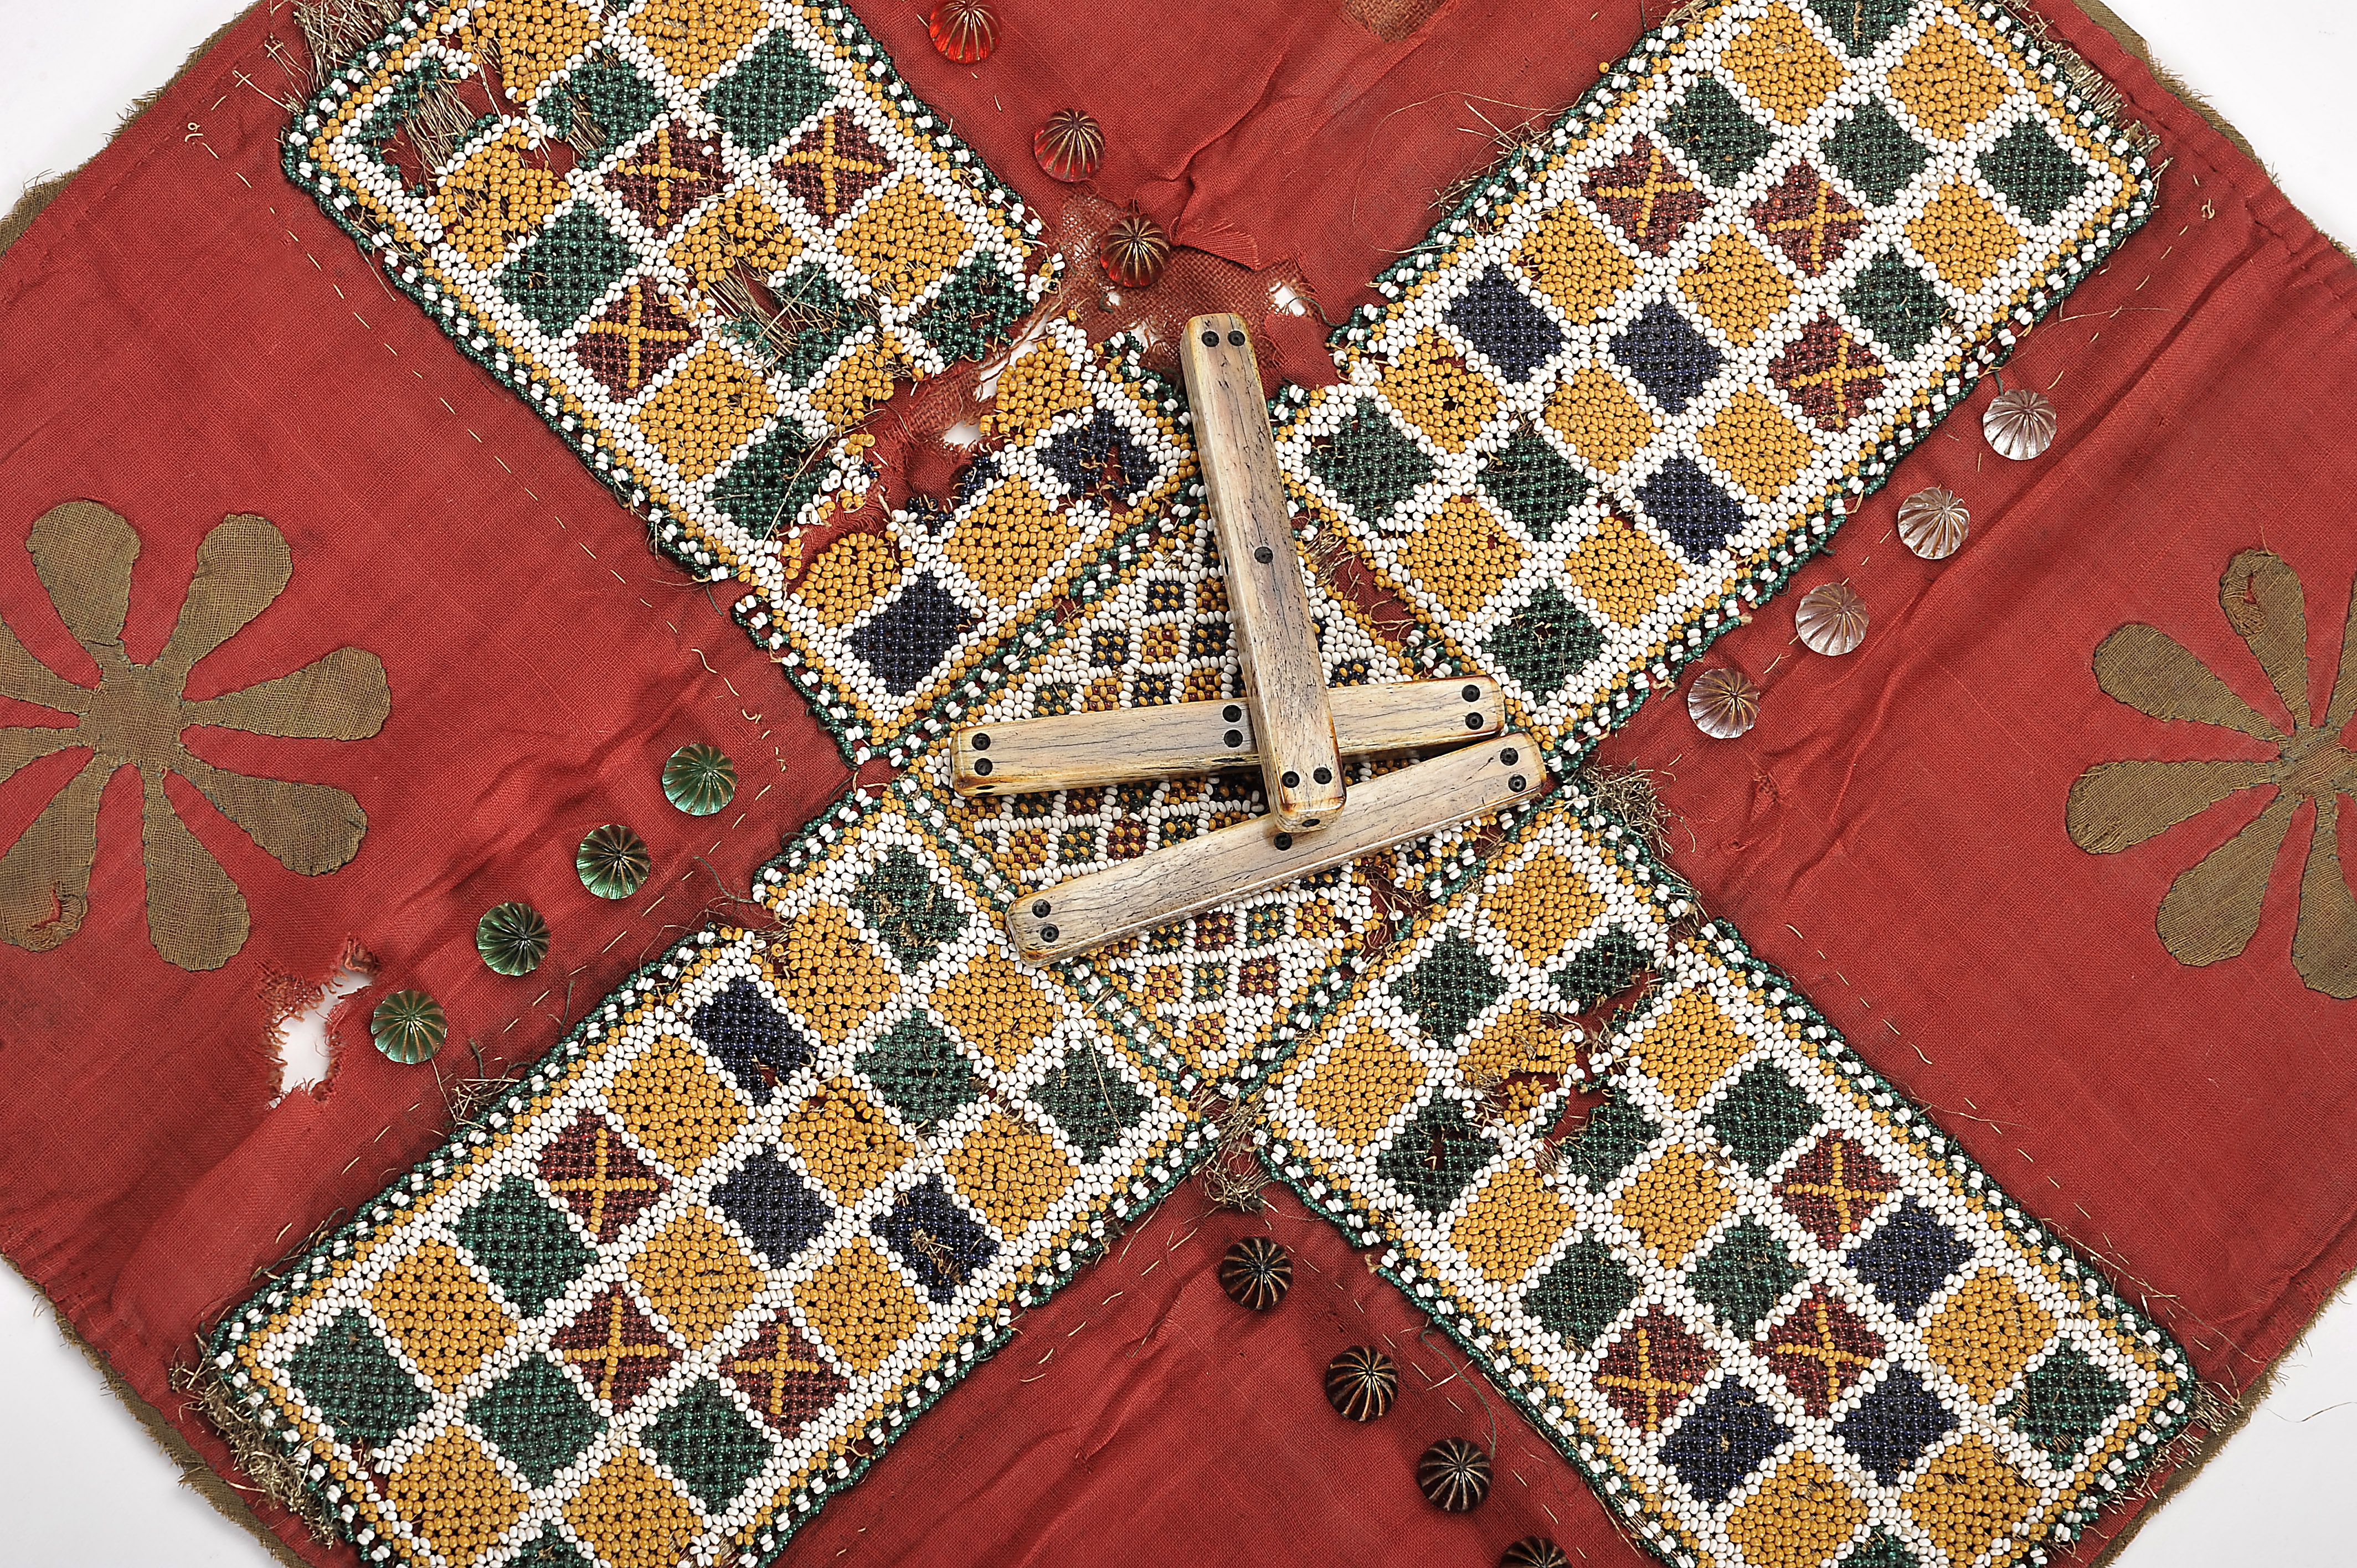 Pachisi pieces, dice and board - Image 2 of 7